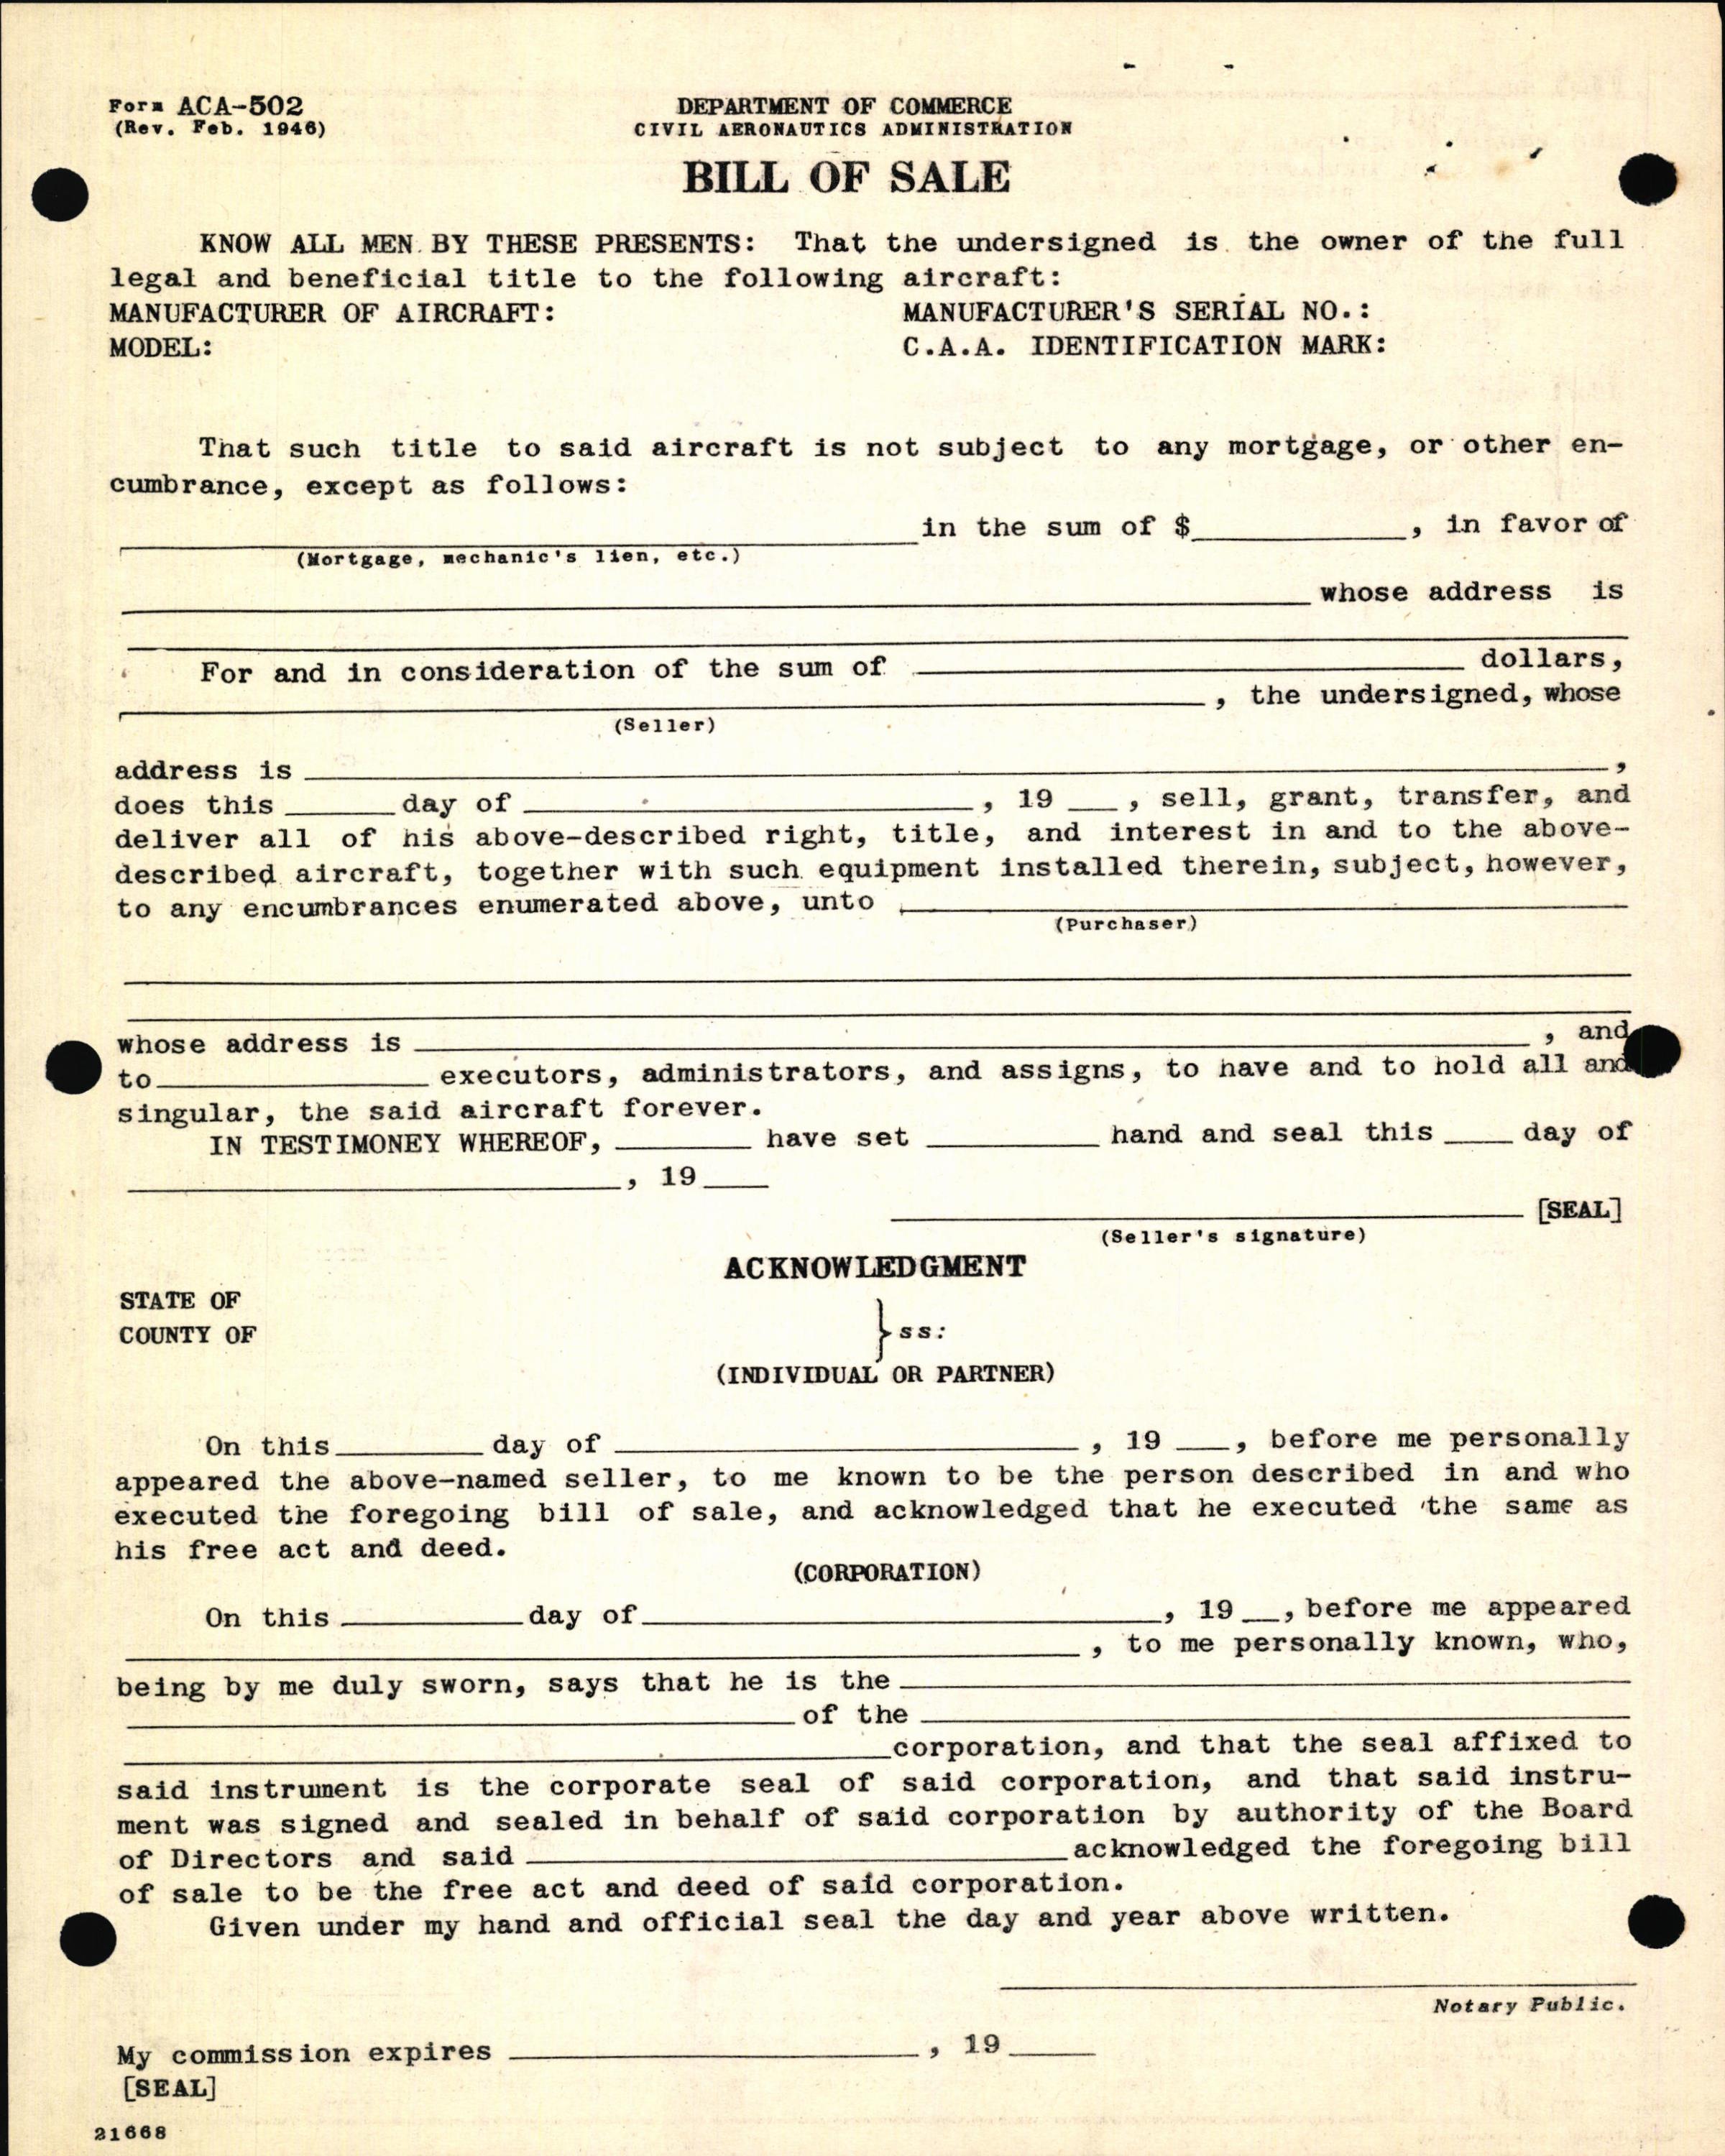 Sample page 6 from AirCorps Library document: Technical Information for Serial Number 1328